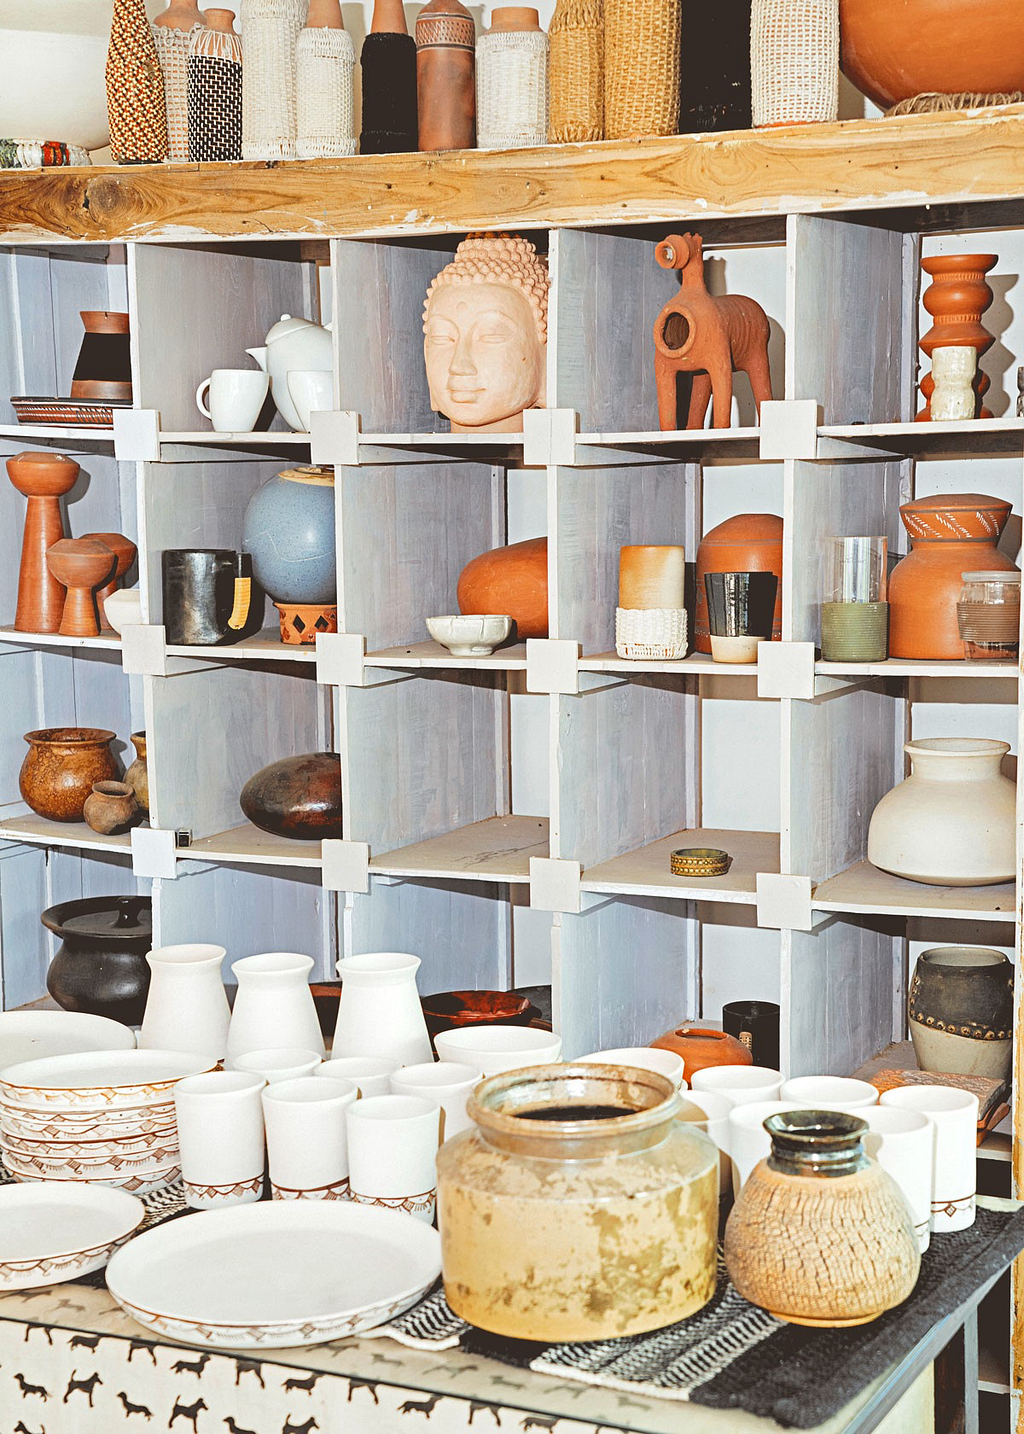 Shelves full of pottery and sculptures inside the studio at Bhuj.